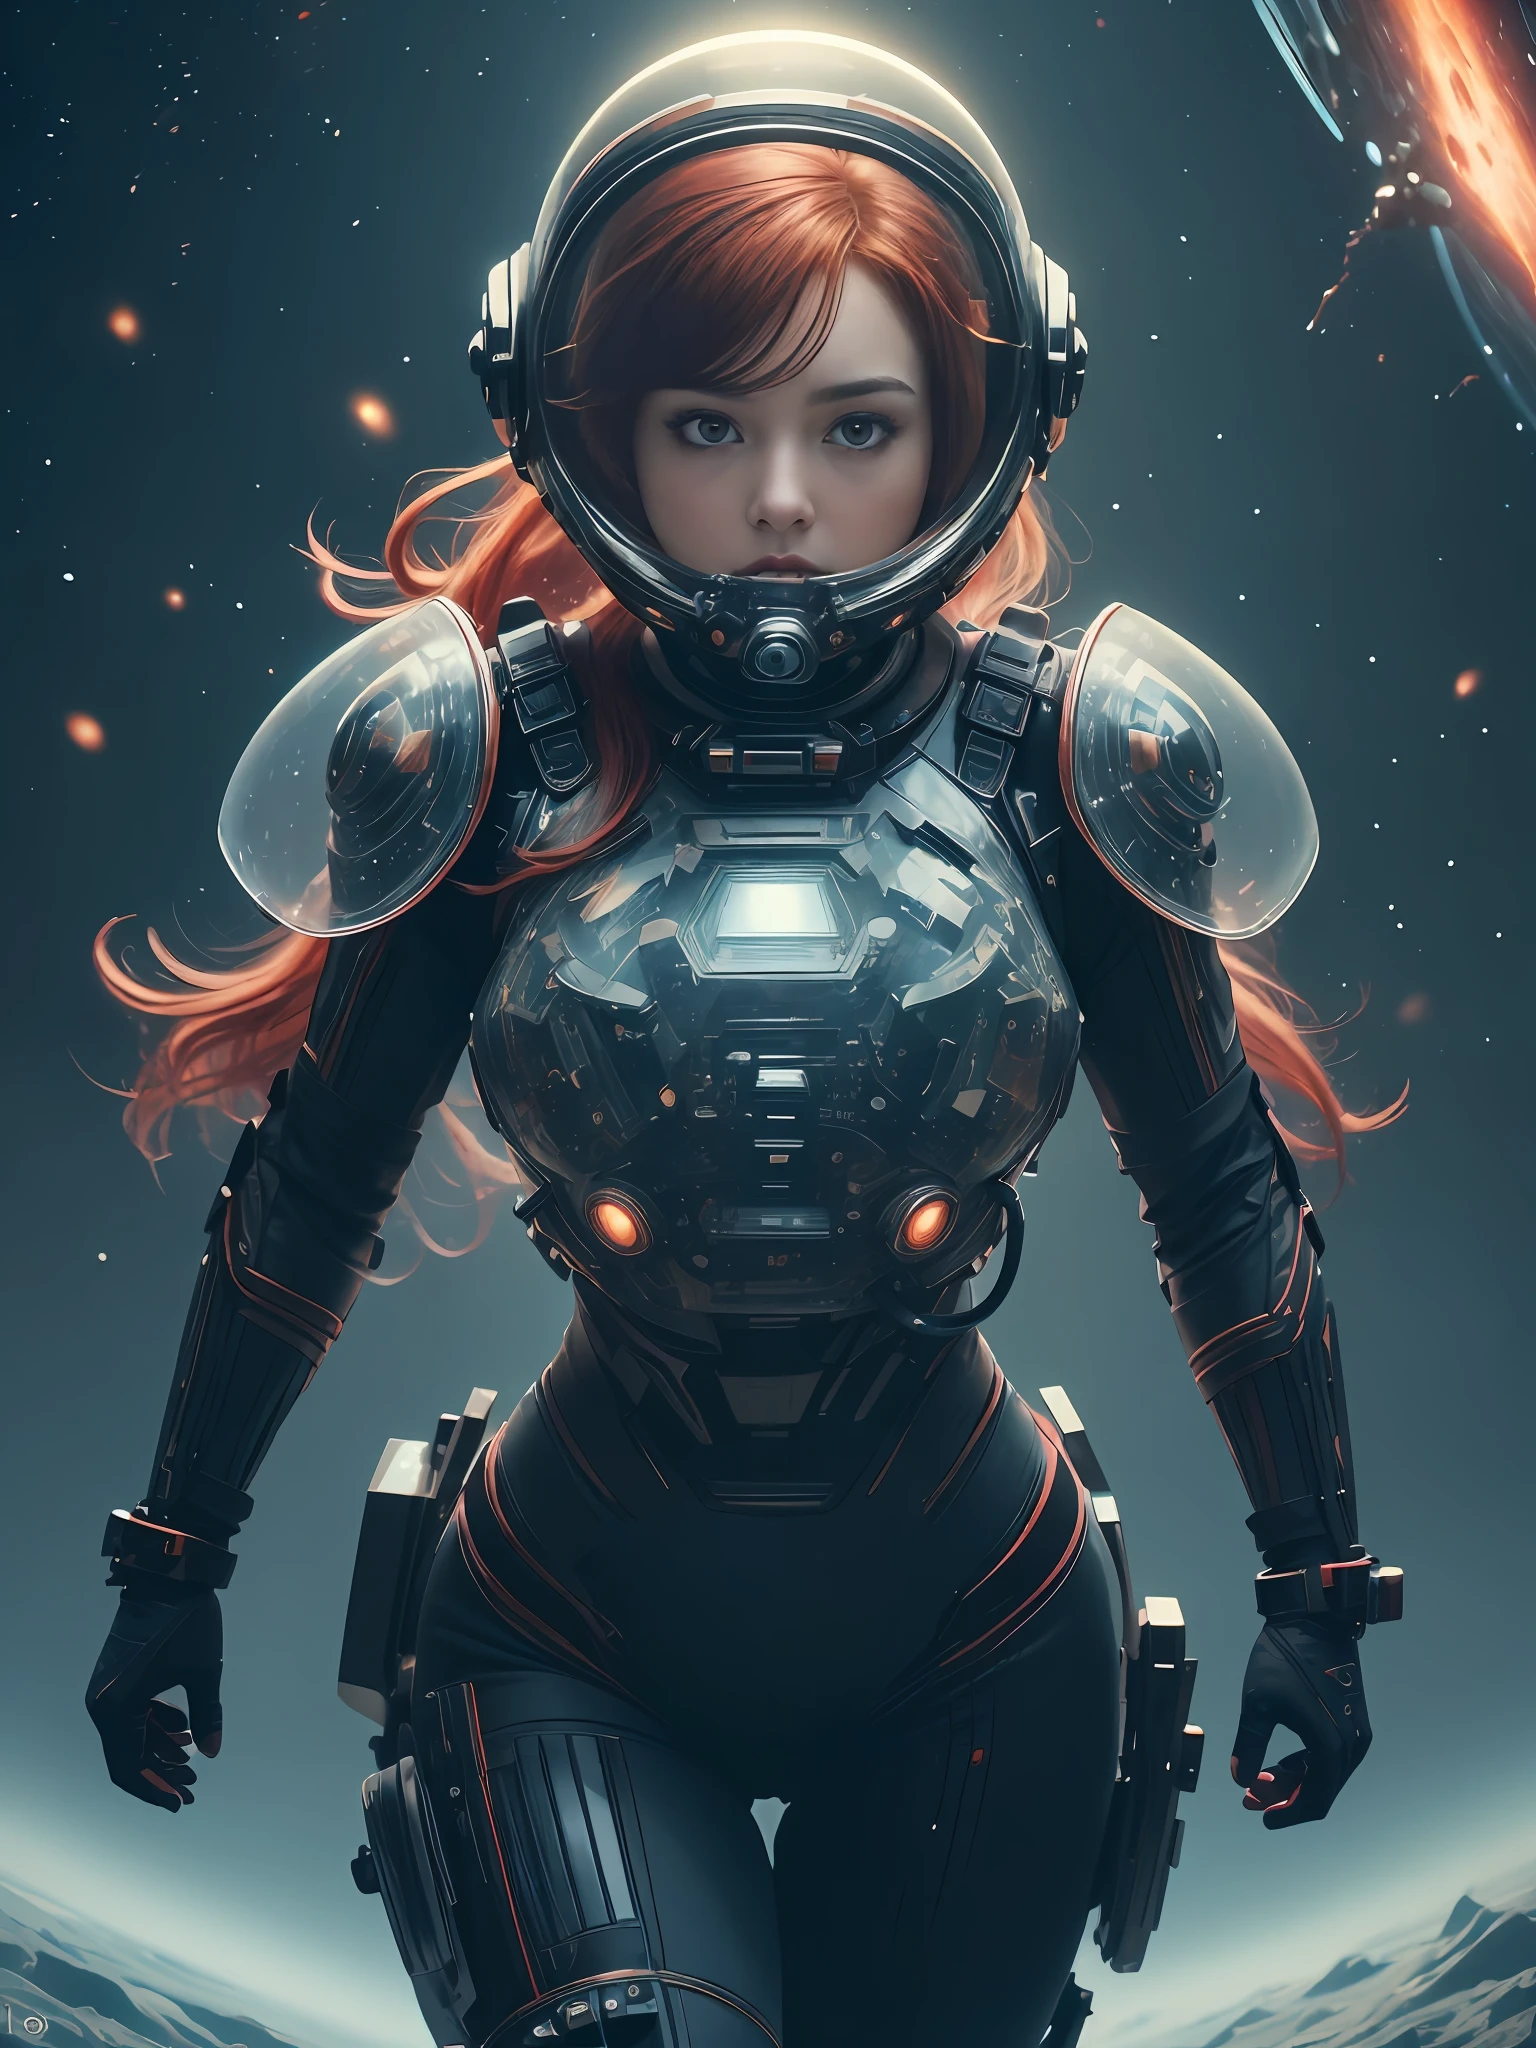 best quality, particle effect, raytracing, scening lighting, perfect lighting, masterpiece ,(female space soldier, wearing red and black space suit, helmet, tined face shield, rebreather, accentuated booty) ,8k resolution, pretty face, chubby body, voluptous, wide hips, perfect face,, Intricately detailed cinematic film still, cute, perfect face, (highly detailed, hyperdetailed), natural lighting, red hair, alien planet backround, perfect eyes, full body, cinematic film still from Gravity 2013, best quality, particle effect, raytracing, scening lighting, perfect lighting, masterpiece ,beautiful female space fairer looking out at the horizon, pov ,8k resolution, pretty face, chubby body, voluptous, wide hips, perfect face,, Intricately detailed cinematic film still,cute, perfect face, (highly detailed, hyperdetailed), natural lighting, red hair, alien planet backround, perfect eyes, full body, tentalce sex, eurasian facial features